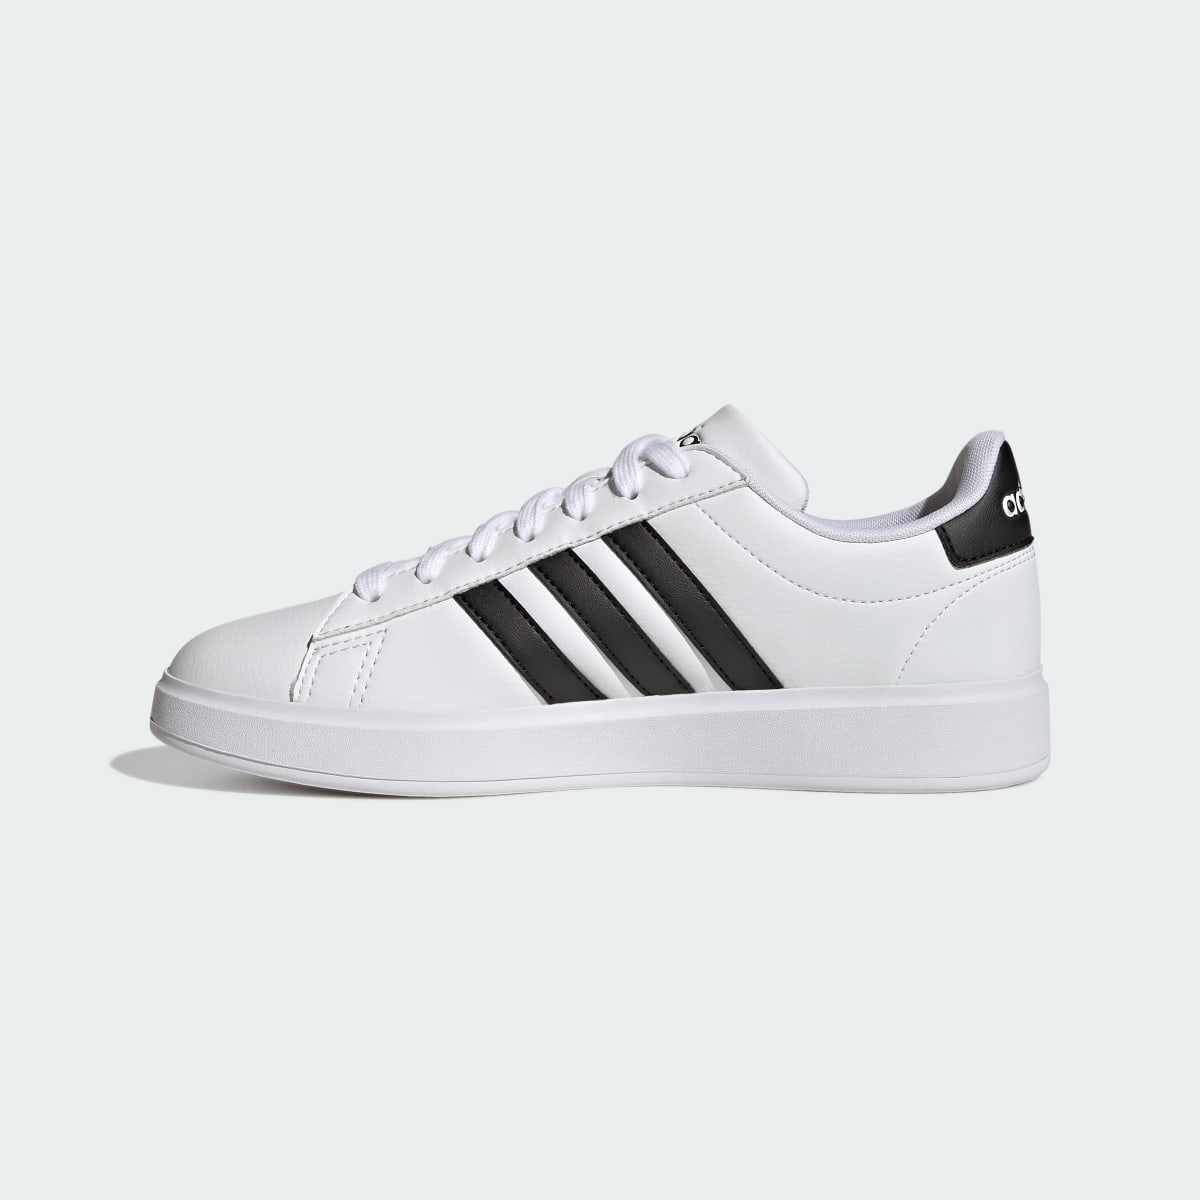 Adidas Grand Court Shoes. 7